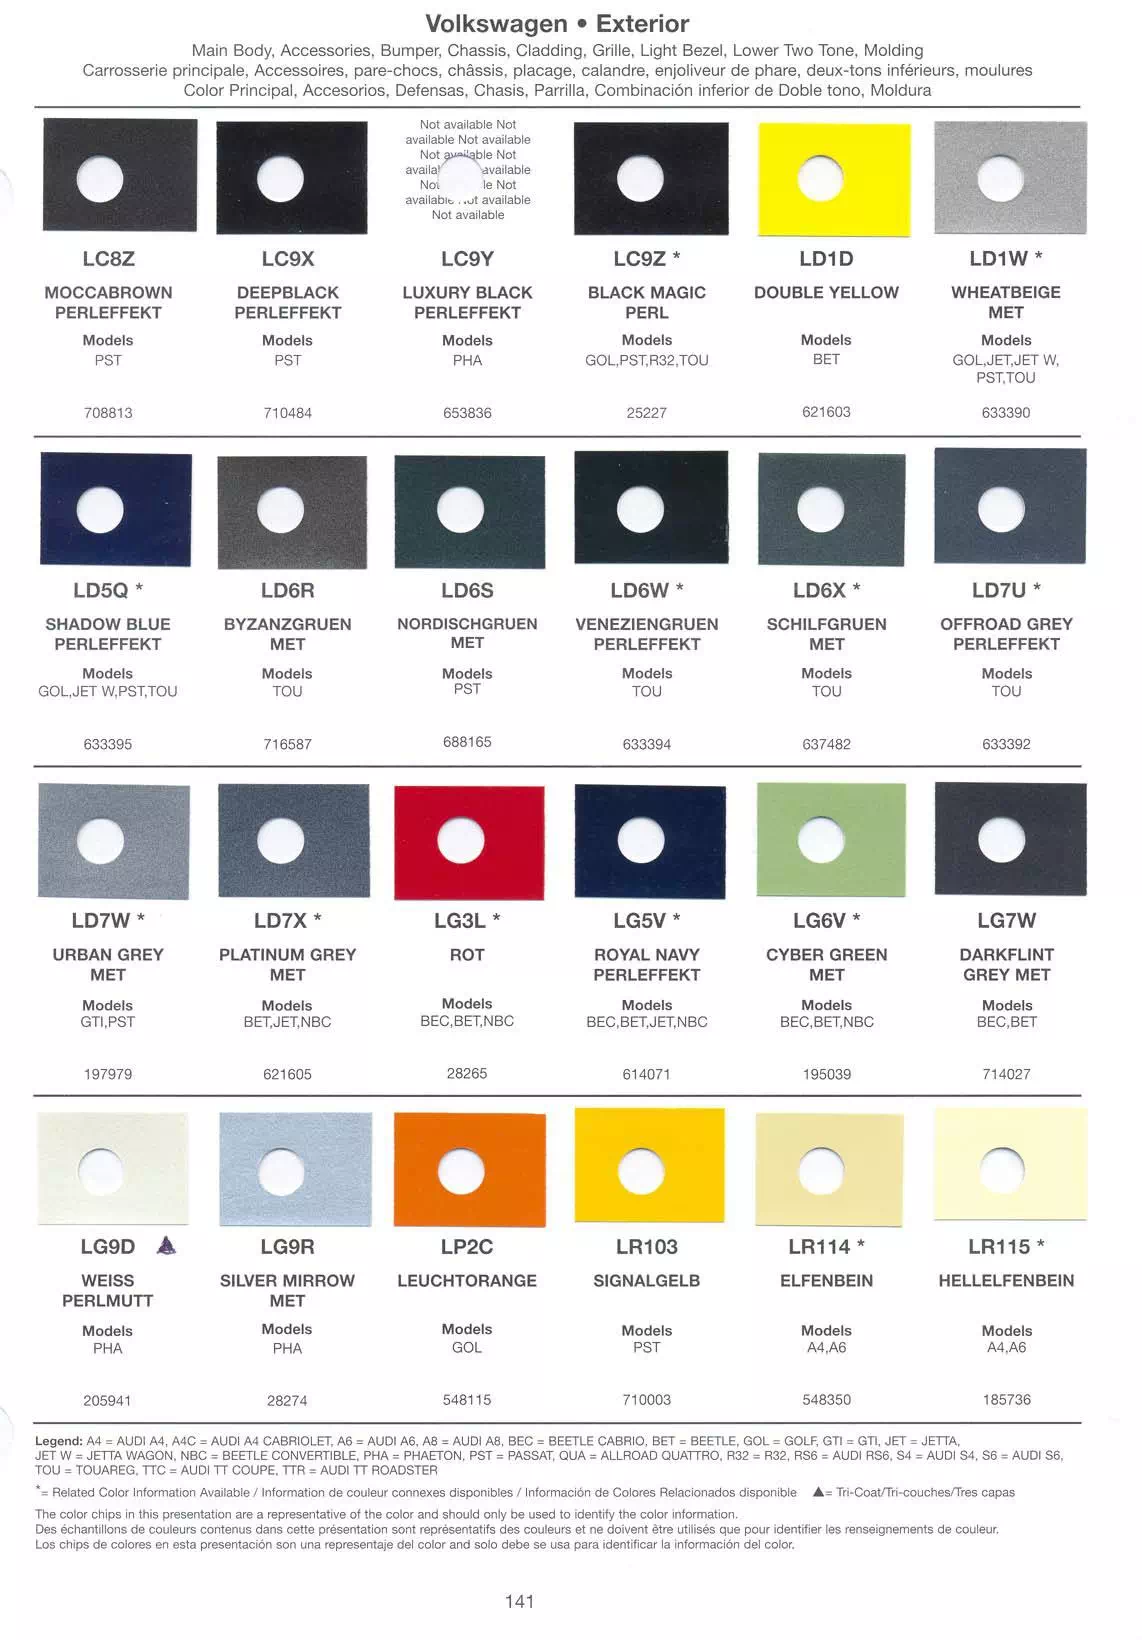 Volkswagen and Audi Color Examples and  Exterior Paint Colors used in 2005